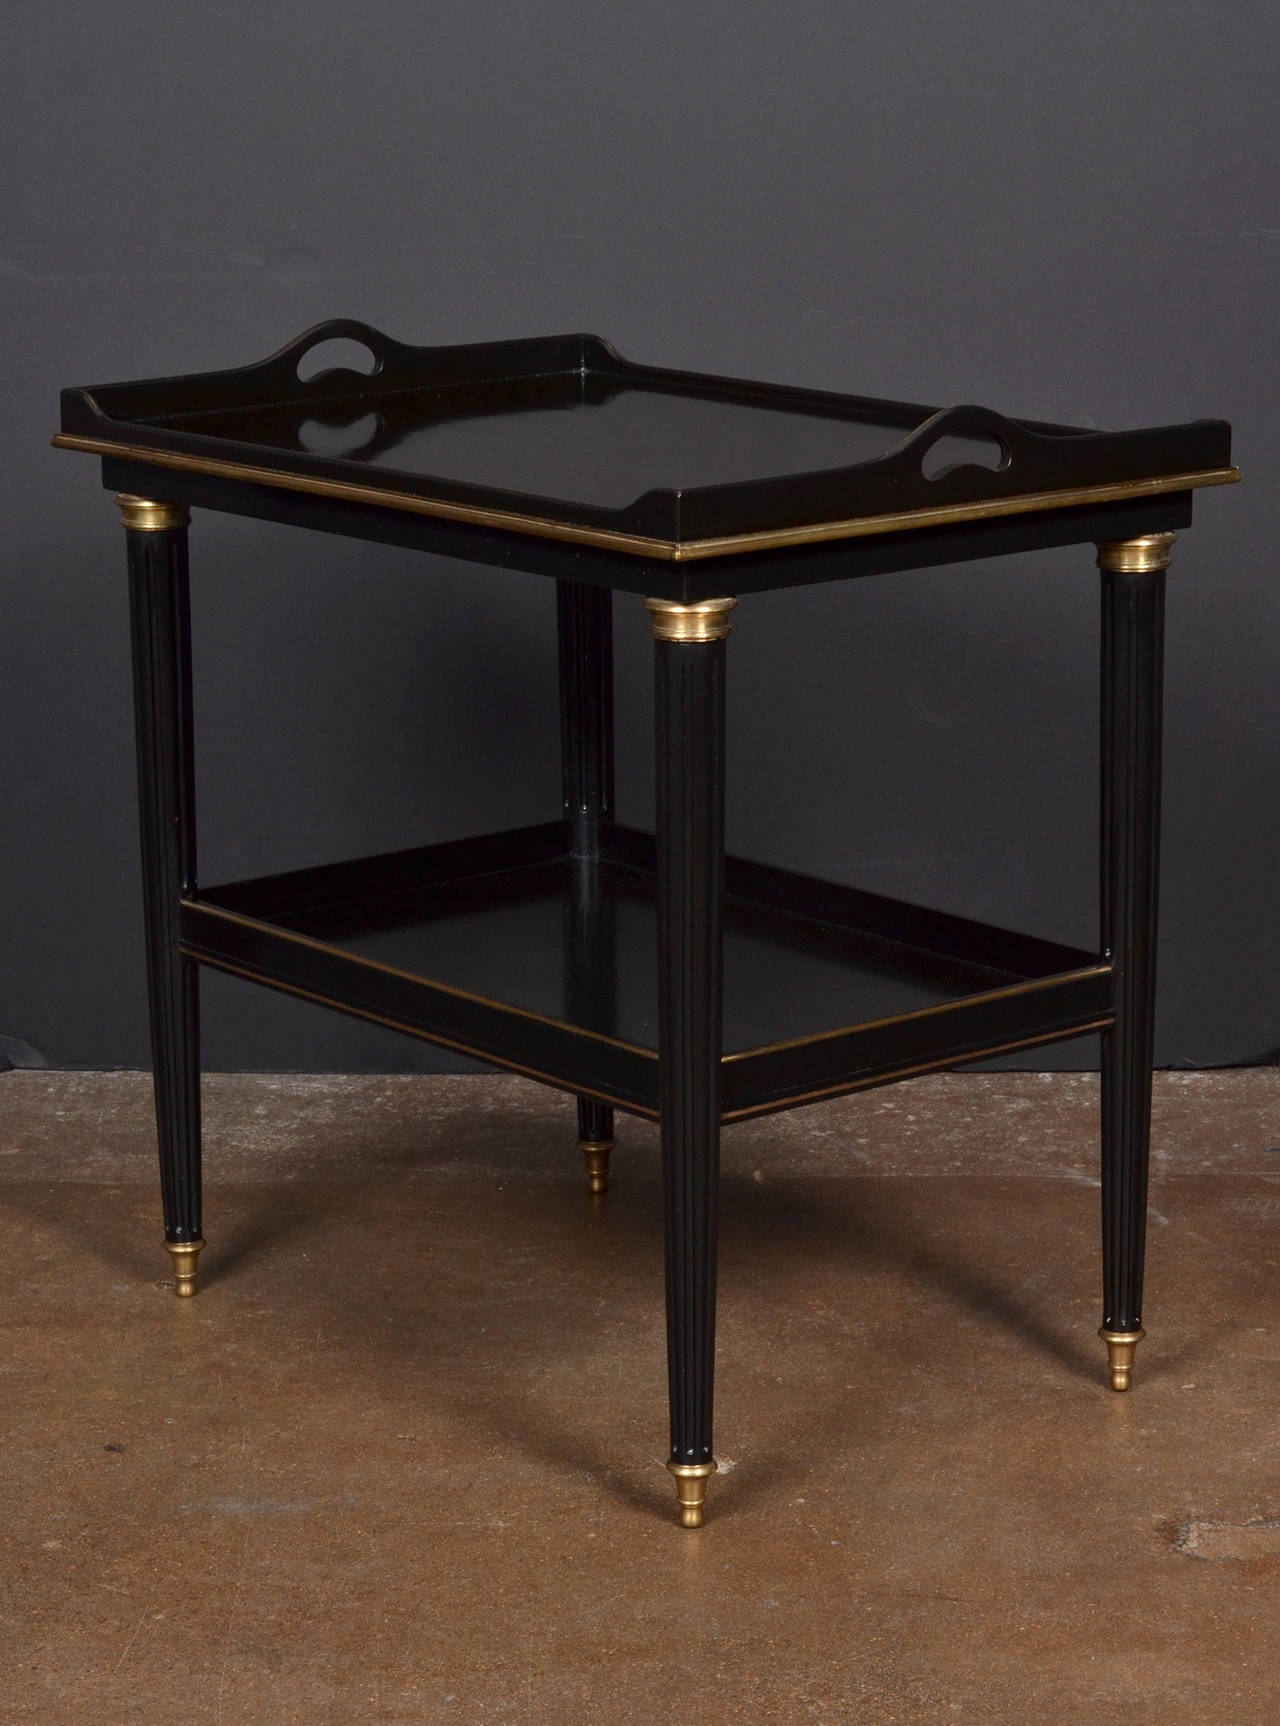 Antique French Louis XVI style tea table in ebonized mahogany, finished with a gleaming French polish and brass trim, with fluted and tapered legs.